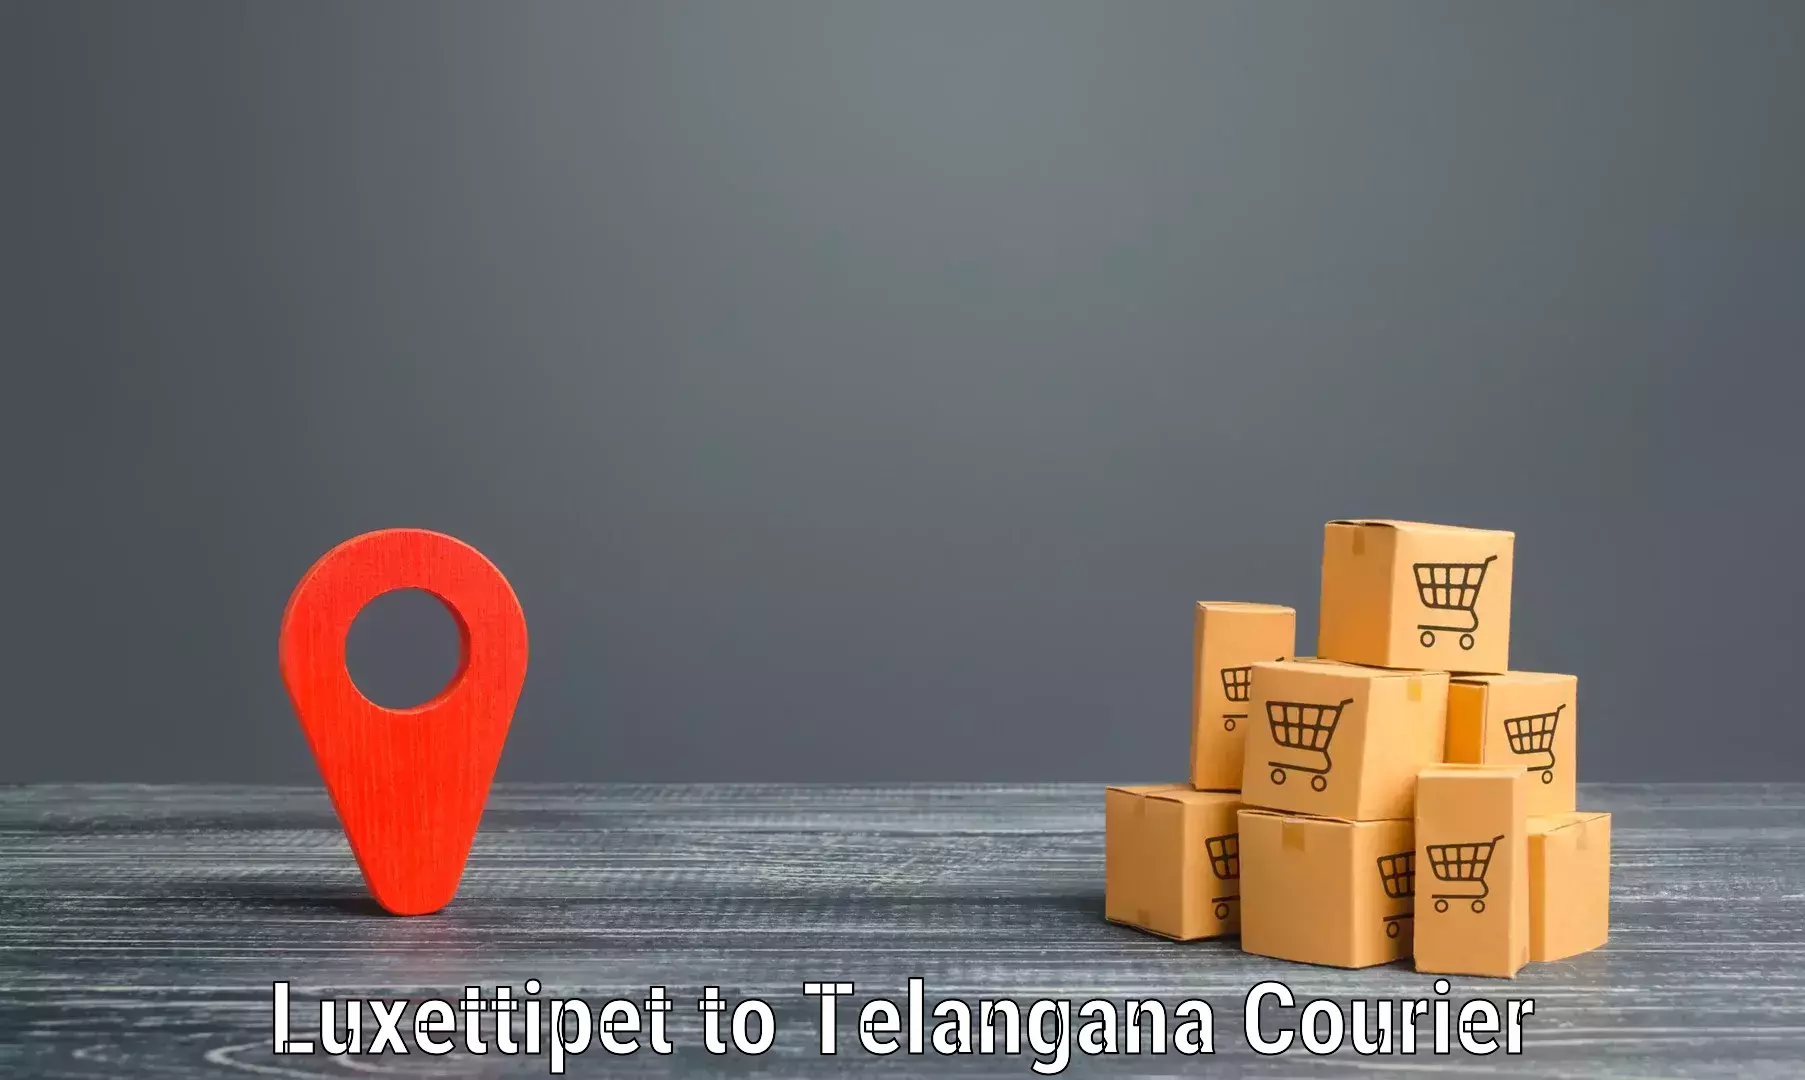 Quality courier partnerships Luxettipet to Dharmapuri Jagtial